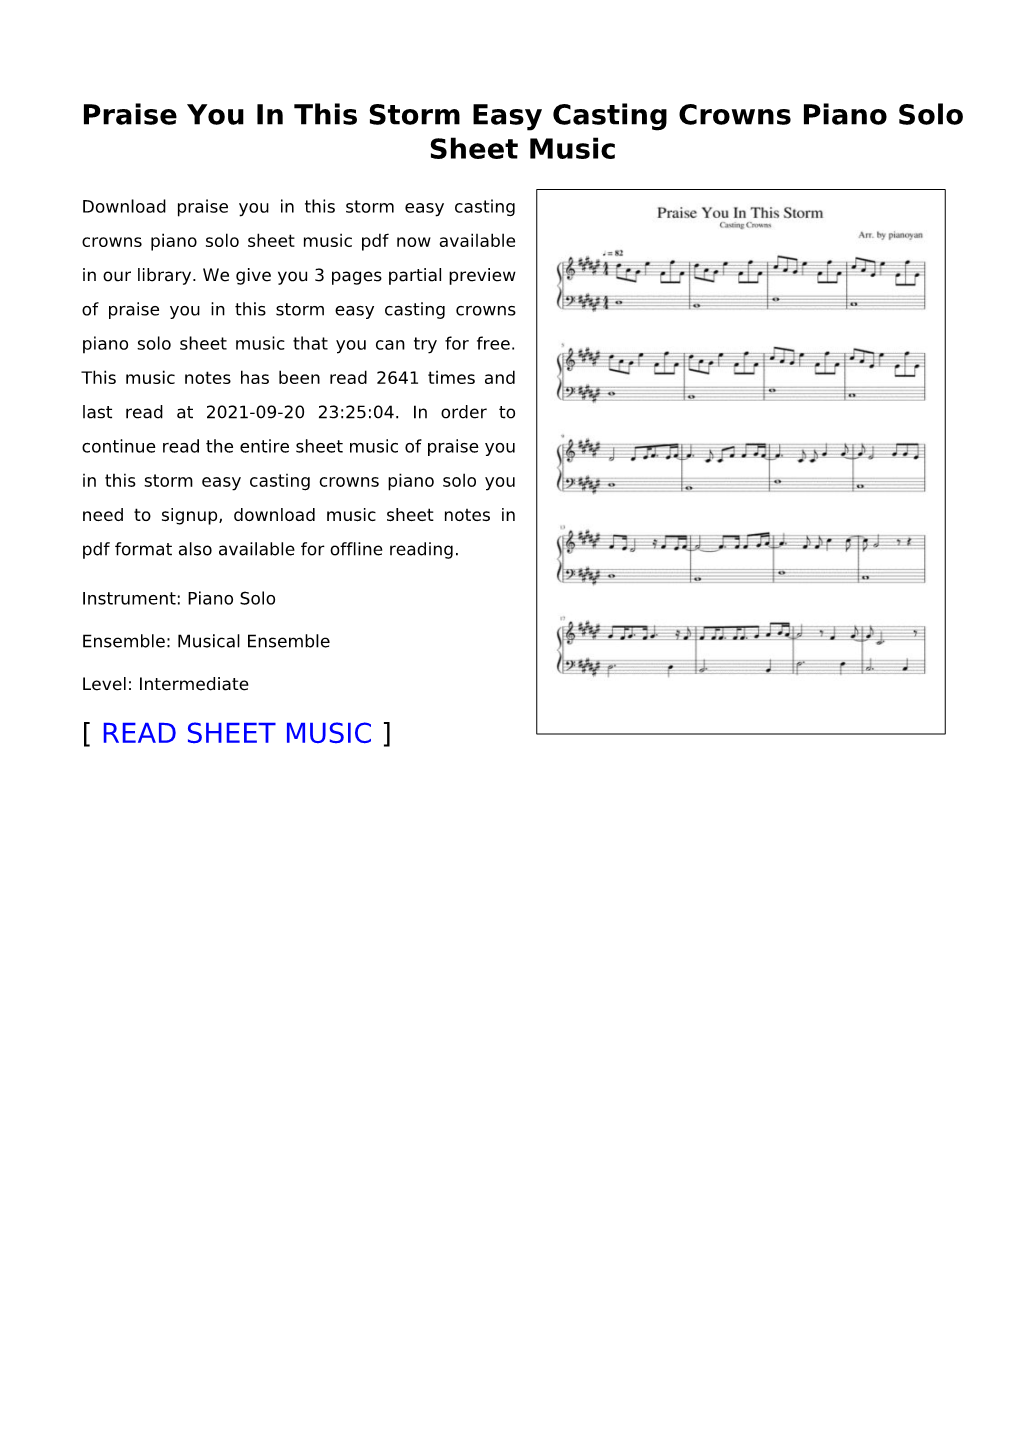 Praise You in This Storm Easy Casting Crowns Piano Solo Sheet Music